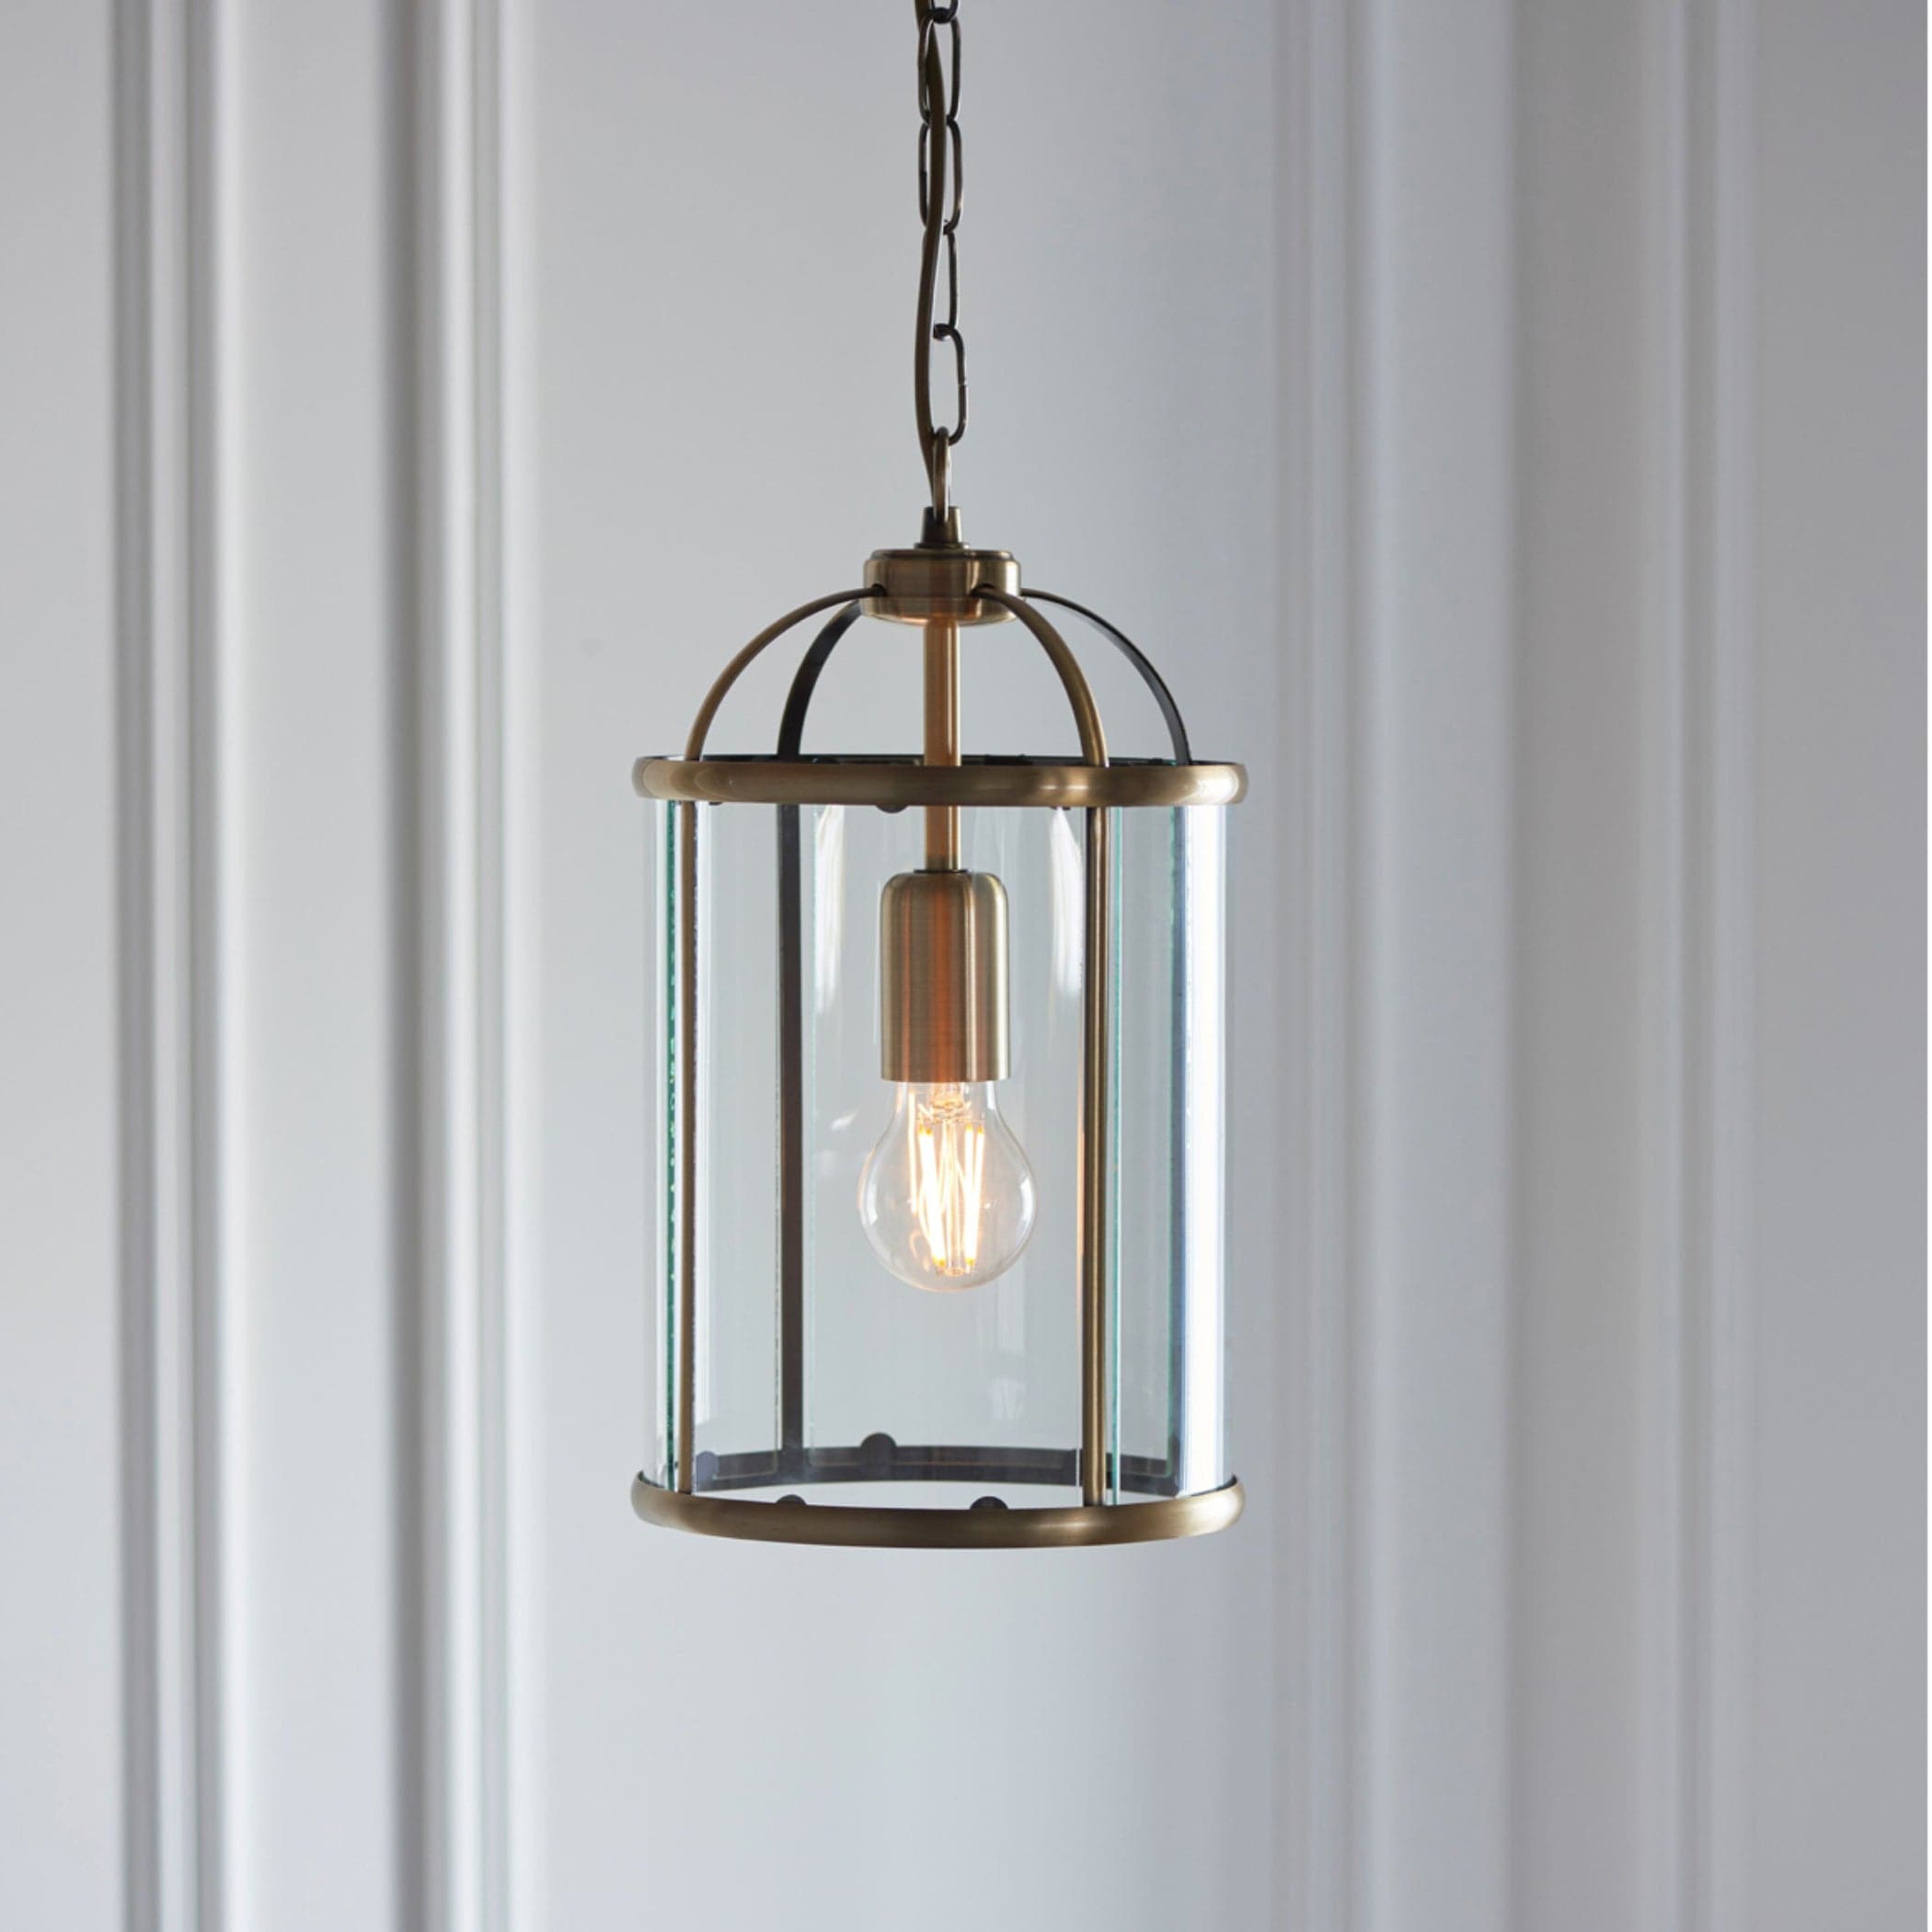 Antiqued Brass and Glass Portland Pendant Light